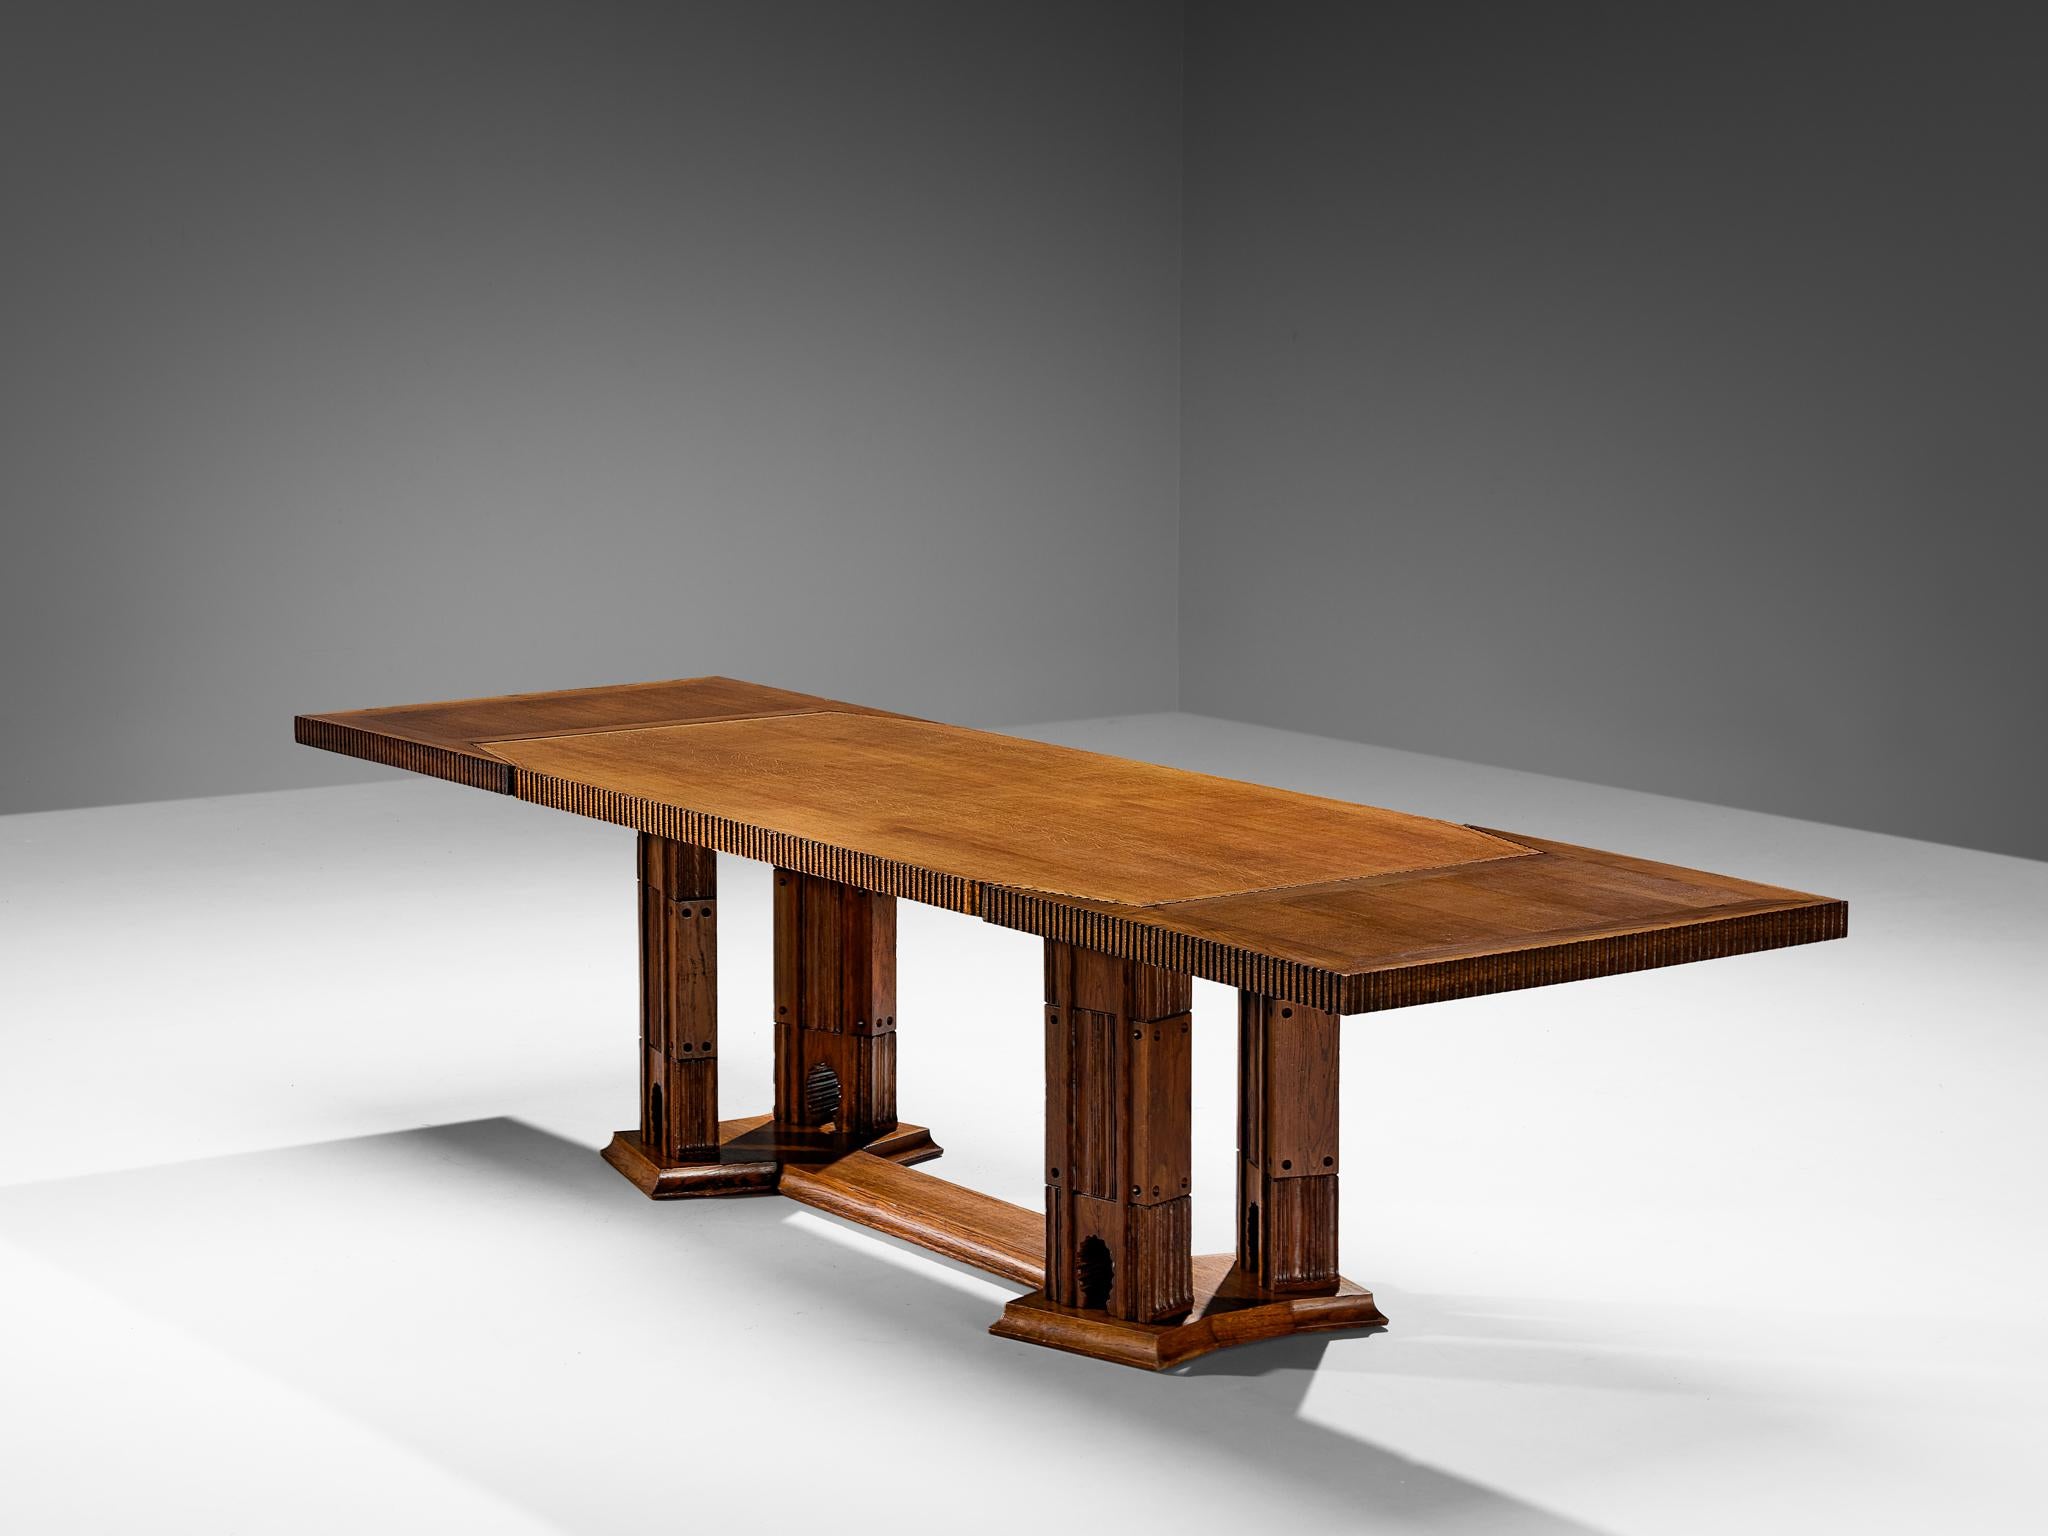 Ernesto Valabrega, extendable dining table, oak, Italy, circa 1935

Ernesto Valabrega once again proves his great eye for materialization and great craftsmanship this dining table is exemplary for. The table is architecturally built with intricate